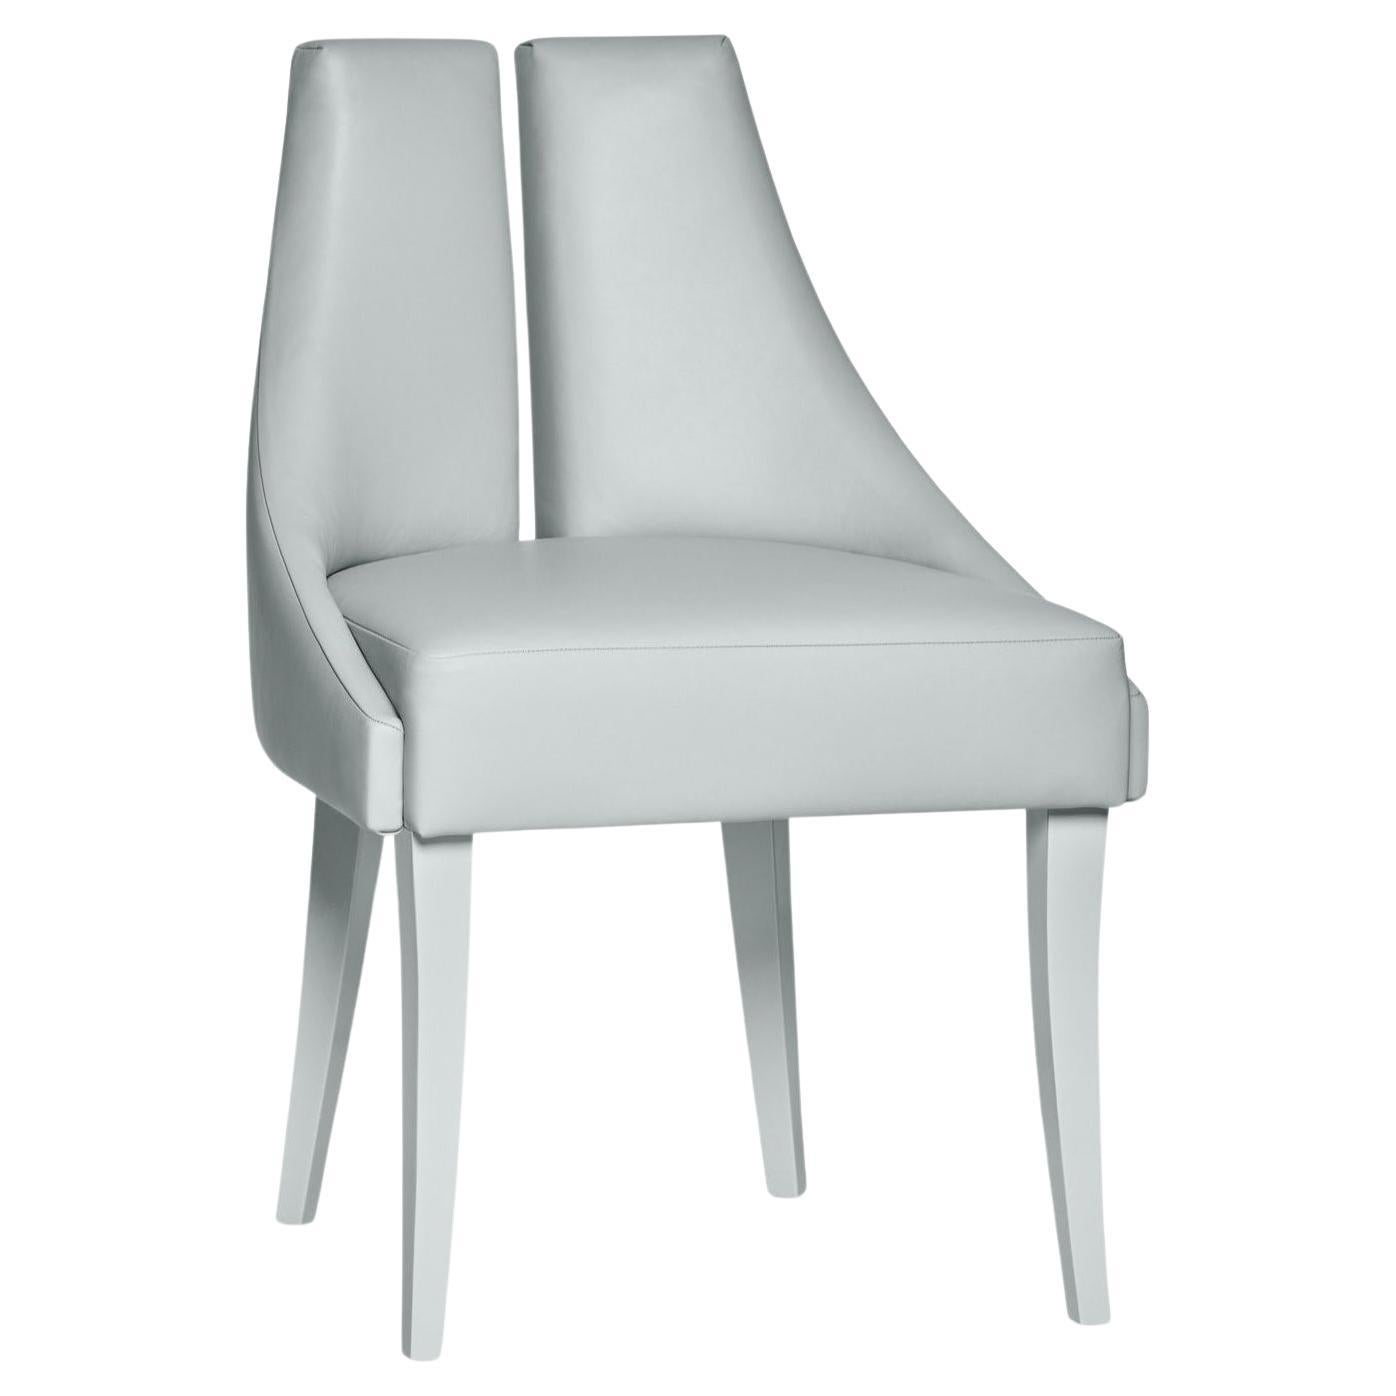 Contemporary Dining Chair w/ Seaming Details